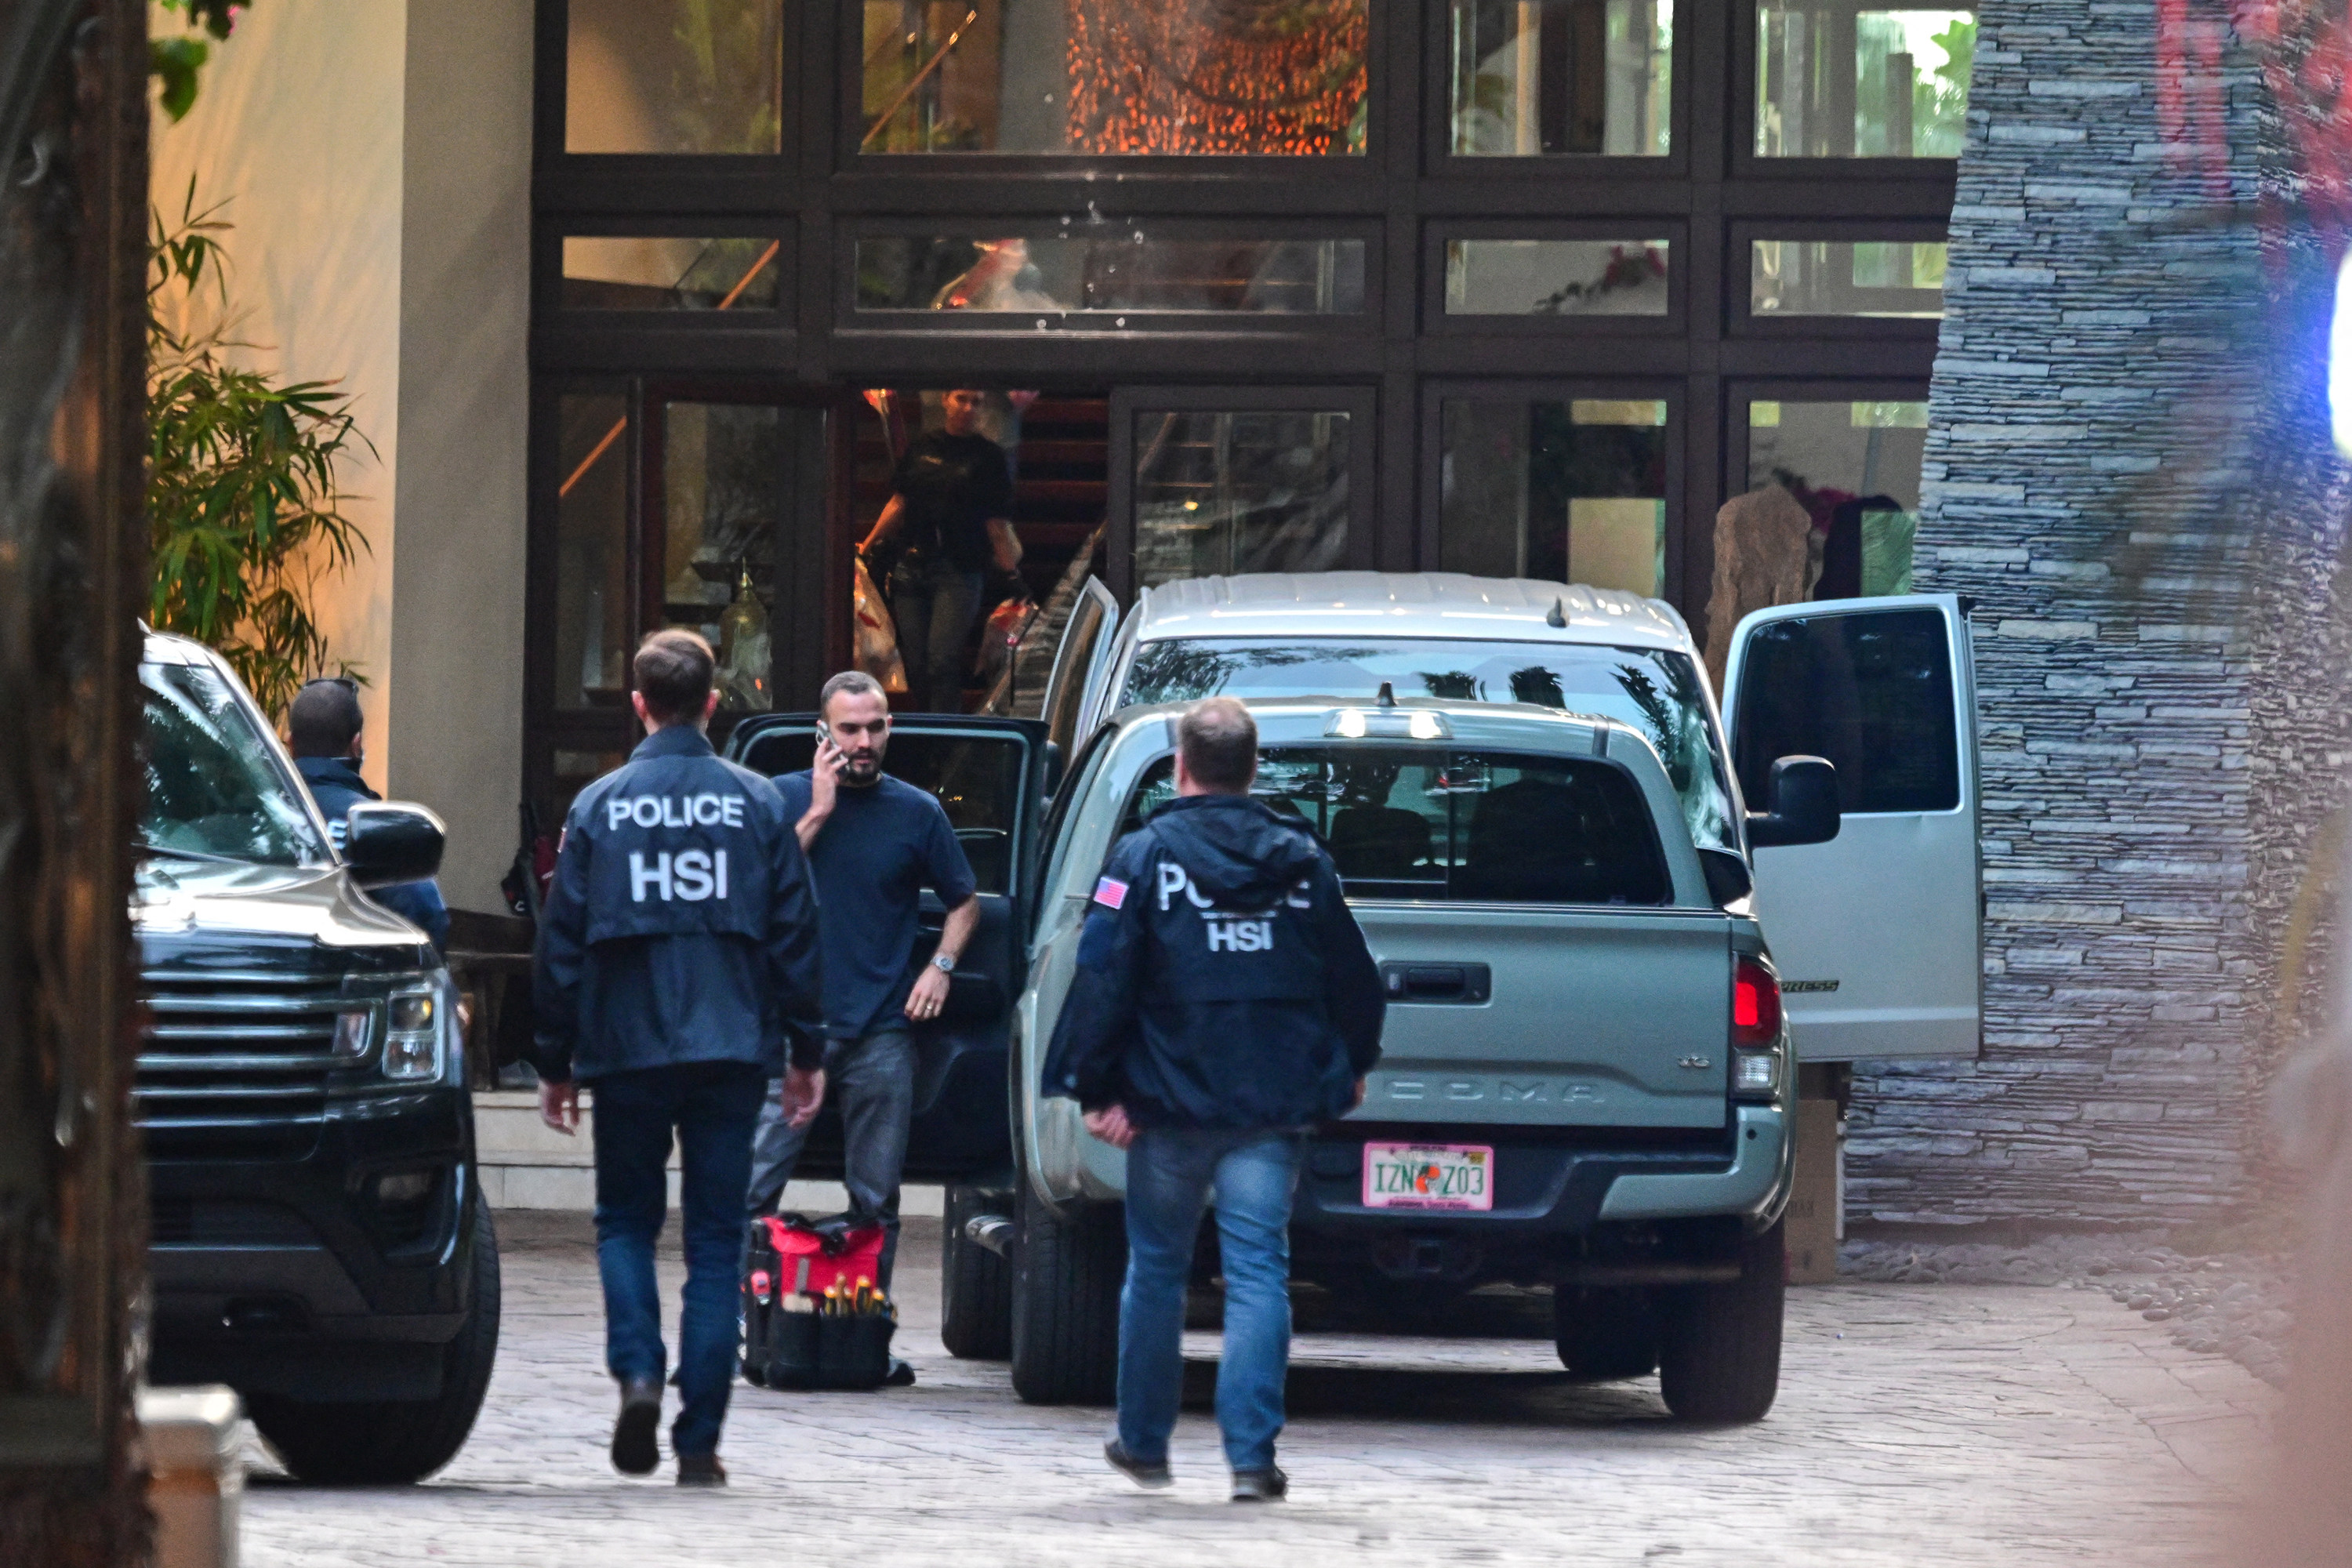 Homeland Security agents at the entrance of Sean “Diddy” Combs’ home in Miami, Florida on Monday. Photo: AFP / Getty Images / TNS